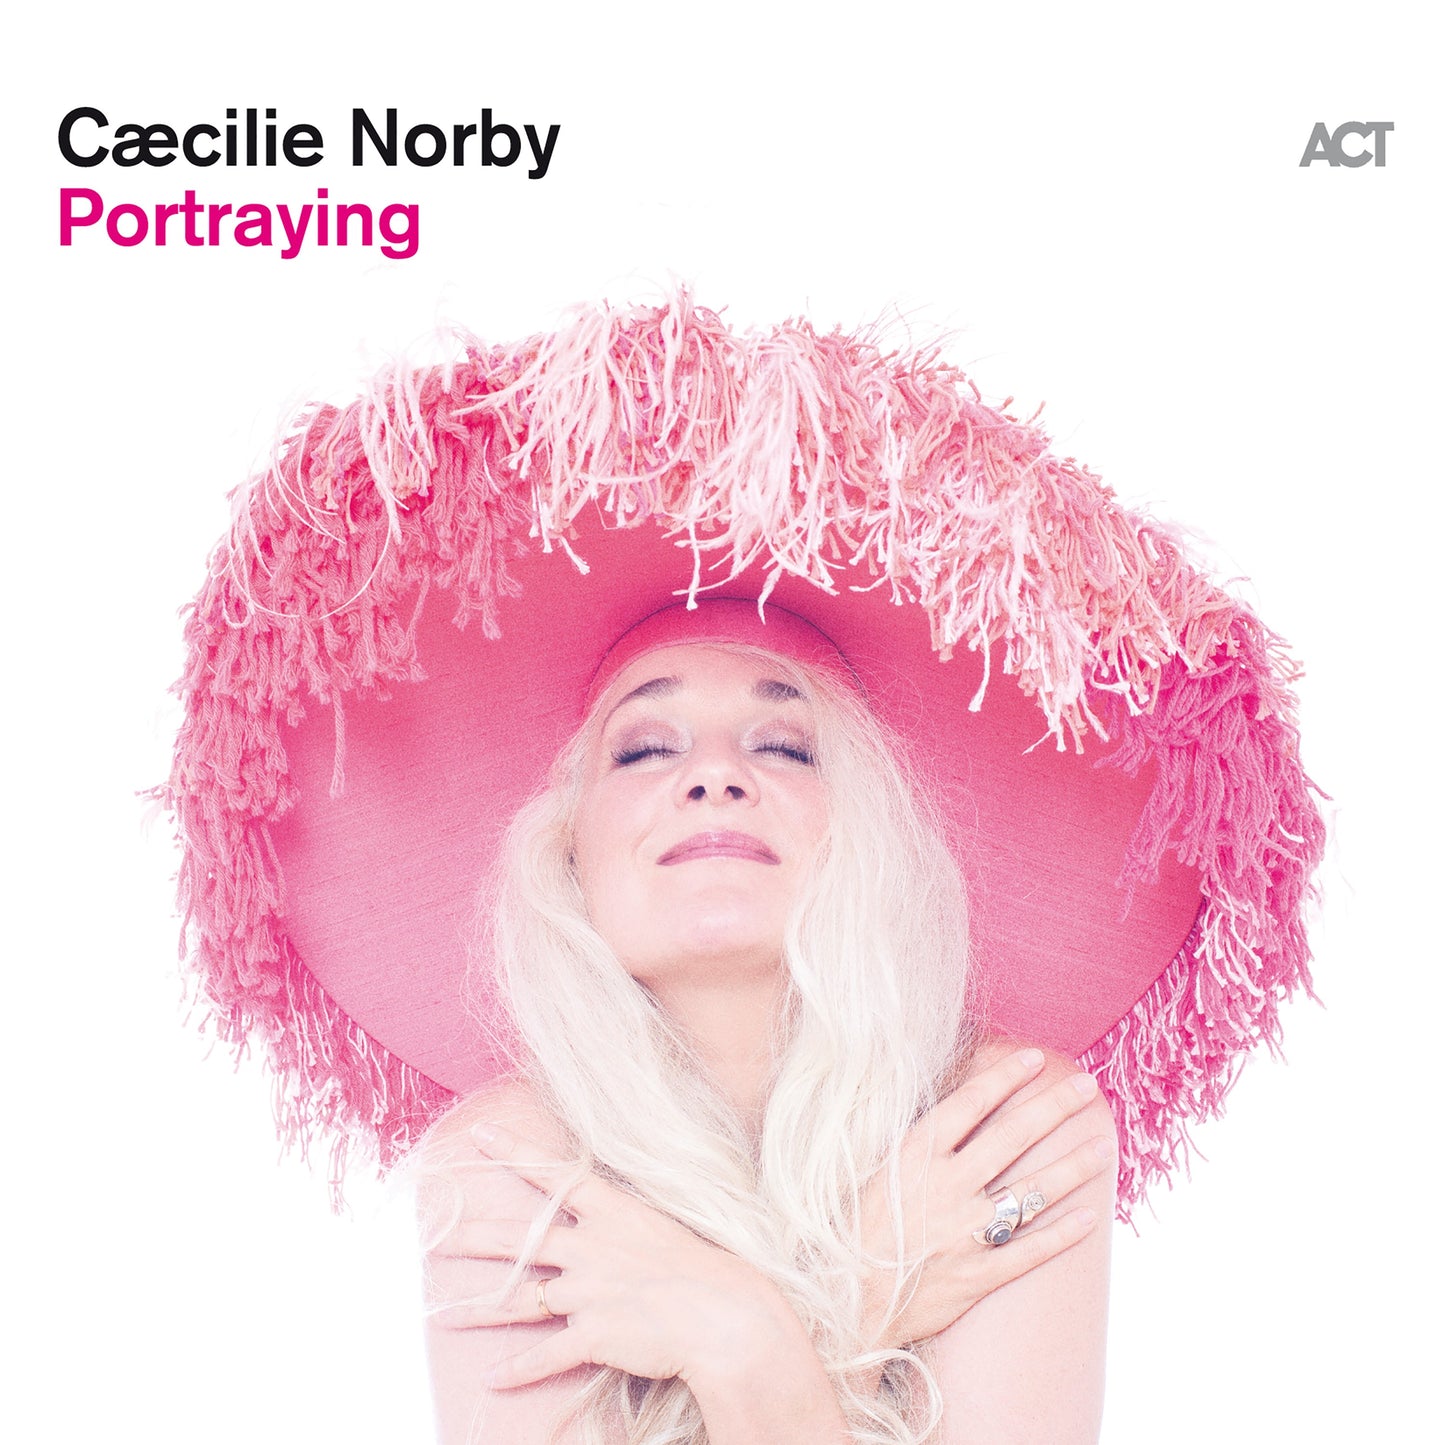 Norby, Cæcilie - Portraying